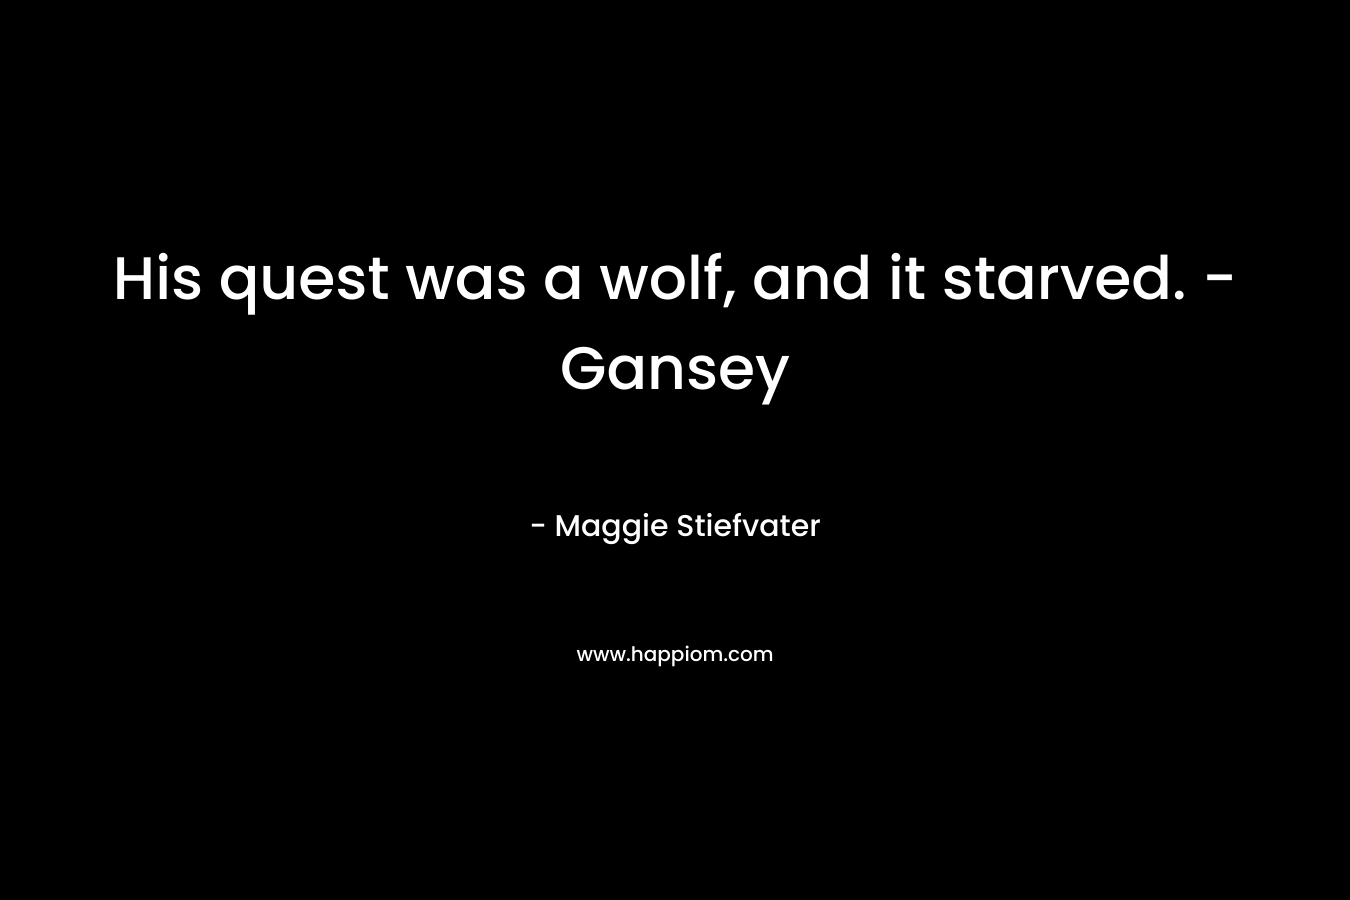 His quest was a wolf, and it starved. - Gansey